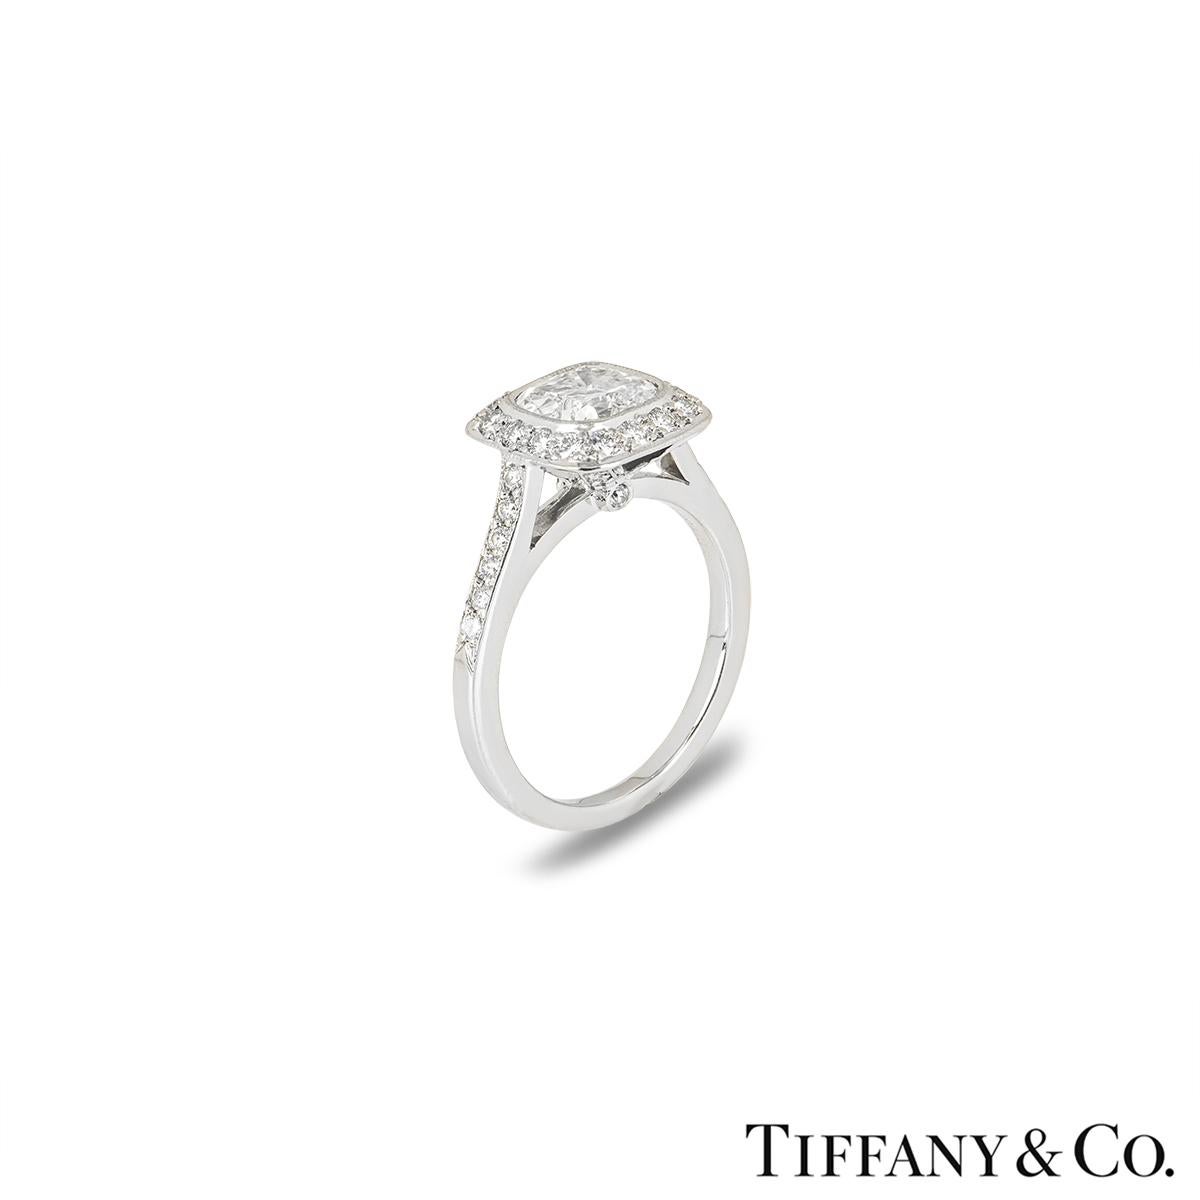 A stunning platinum diamond ring from the Legacy collection by Tiffany & Co. The ring is set to the centre with a 1.34ct modified cushion cut diamond, G colour and VS1 clarity. The diamond is complemented by diamond set shoulders and halo totalling